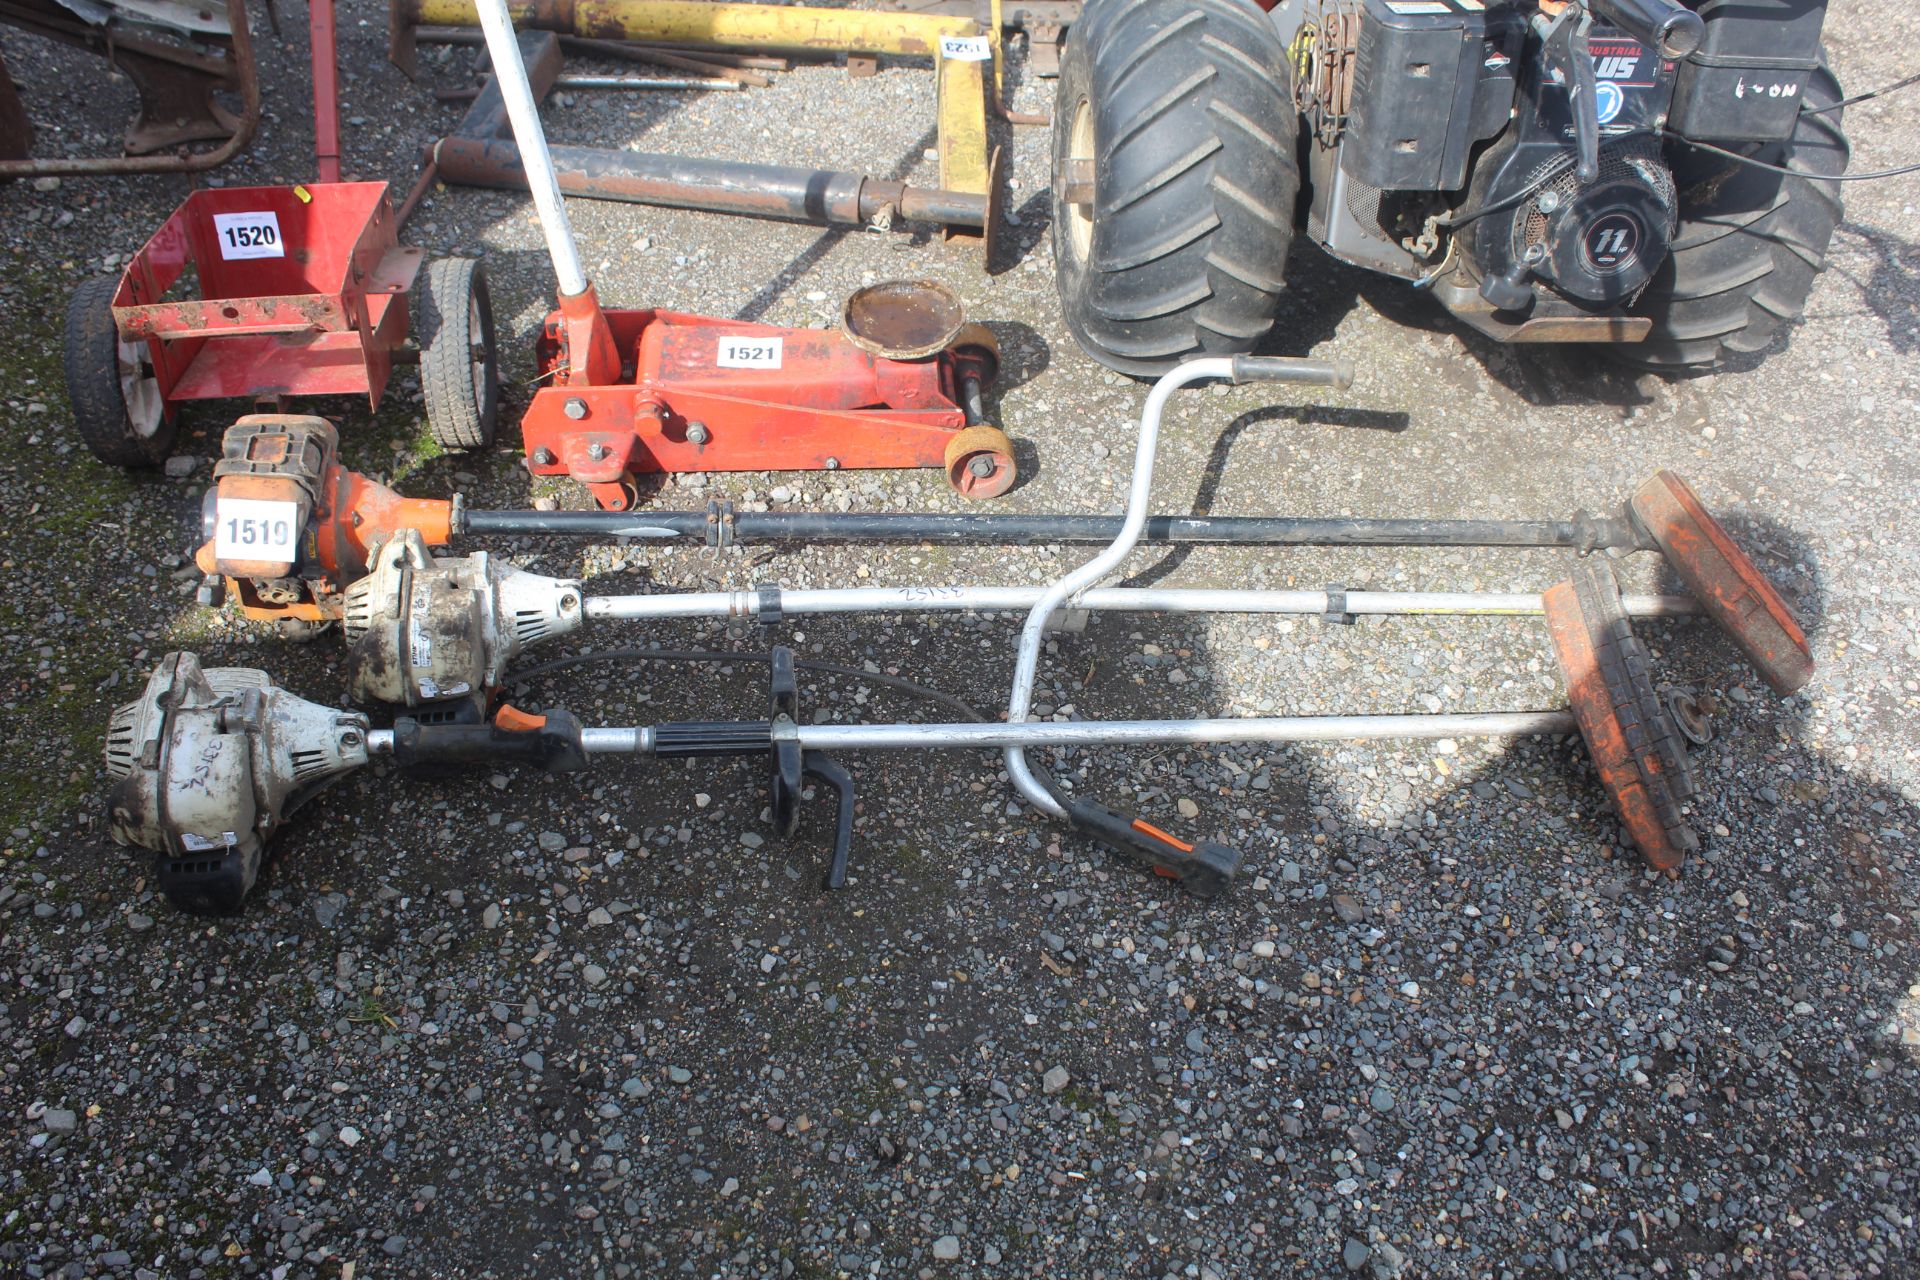 Various strimmers. For spares. V